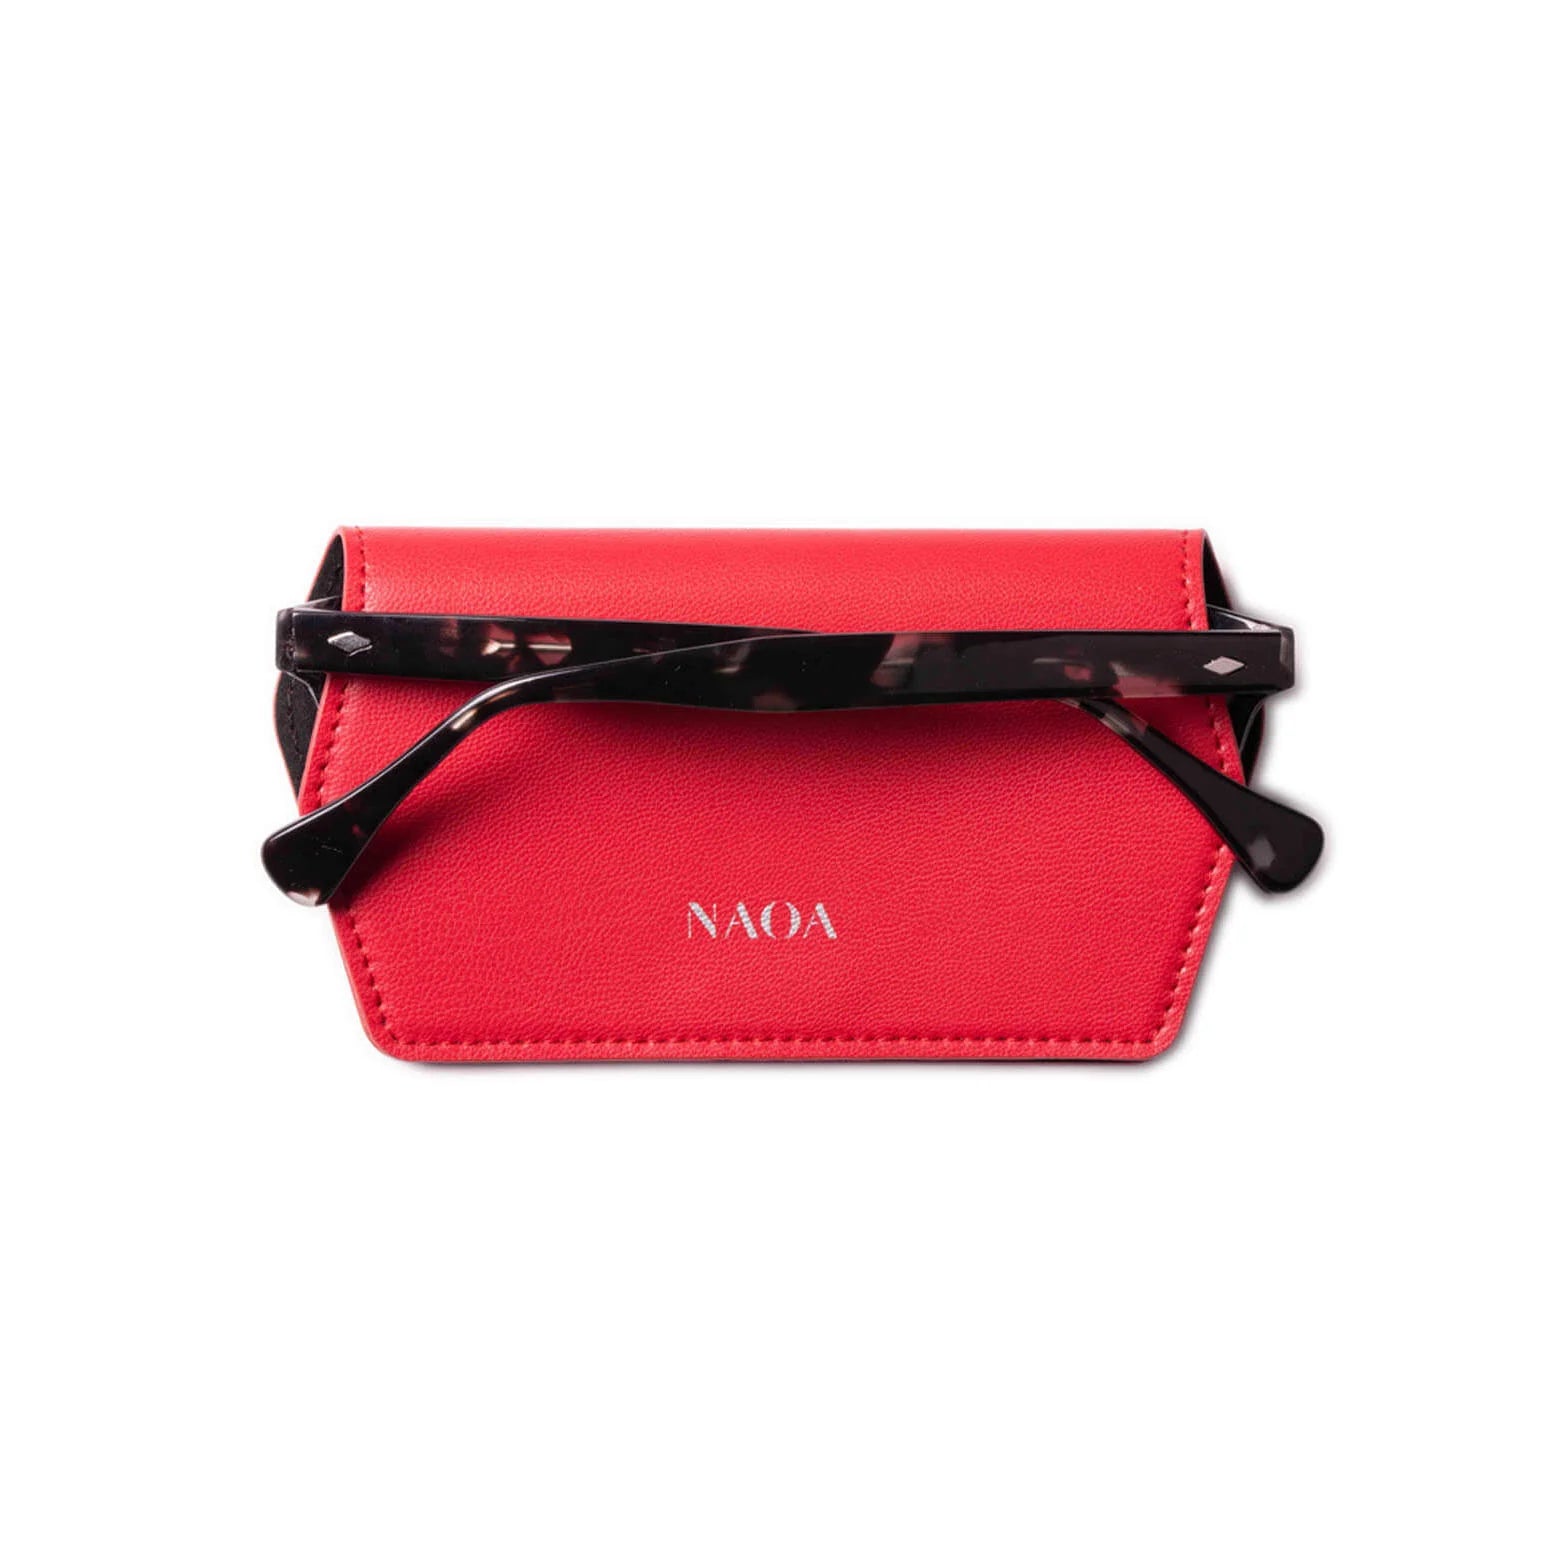 NAOA Apple Leather Slim Glasses Case - Red